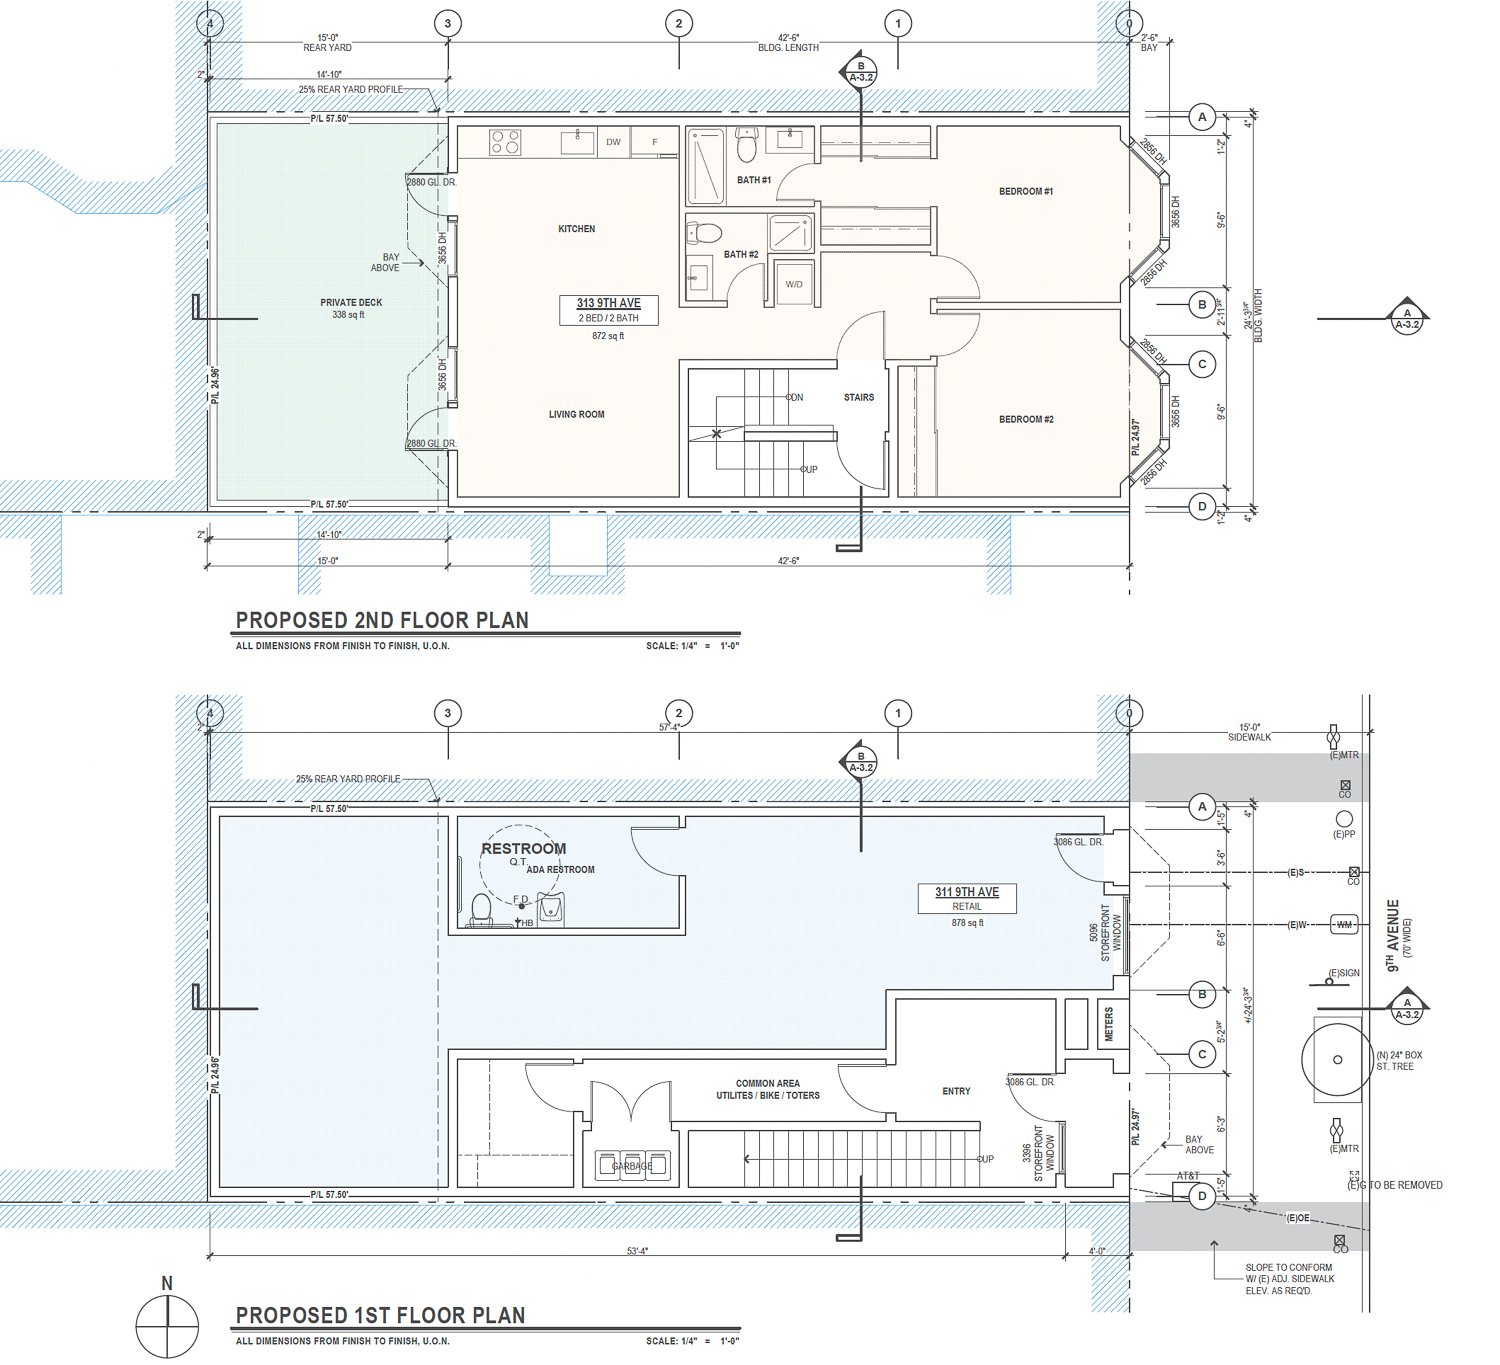 311 9th Avenue first and second level floor plan, illustration by Schaub Li Architects